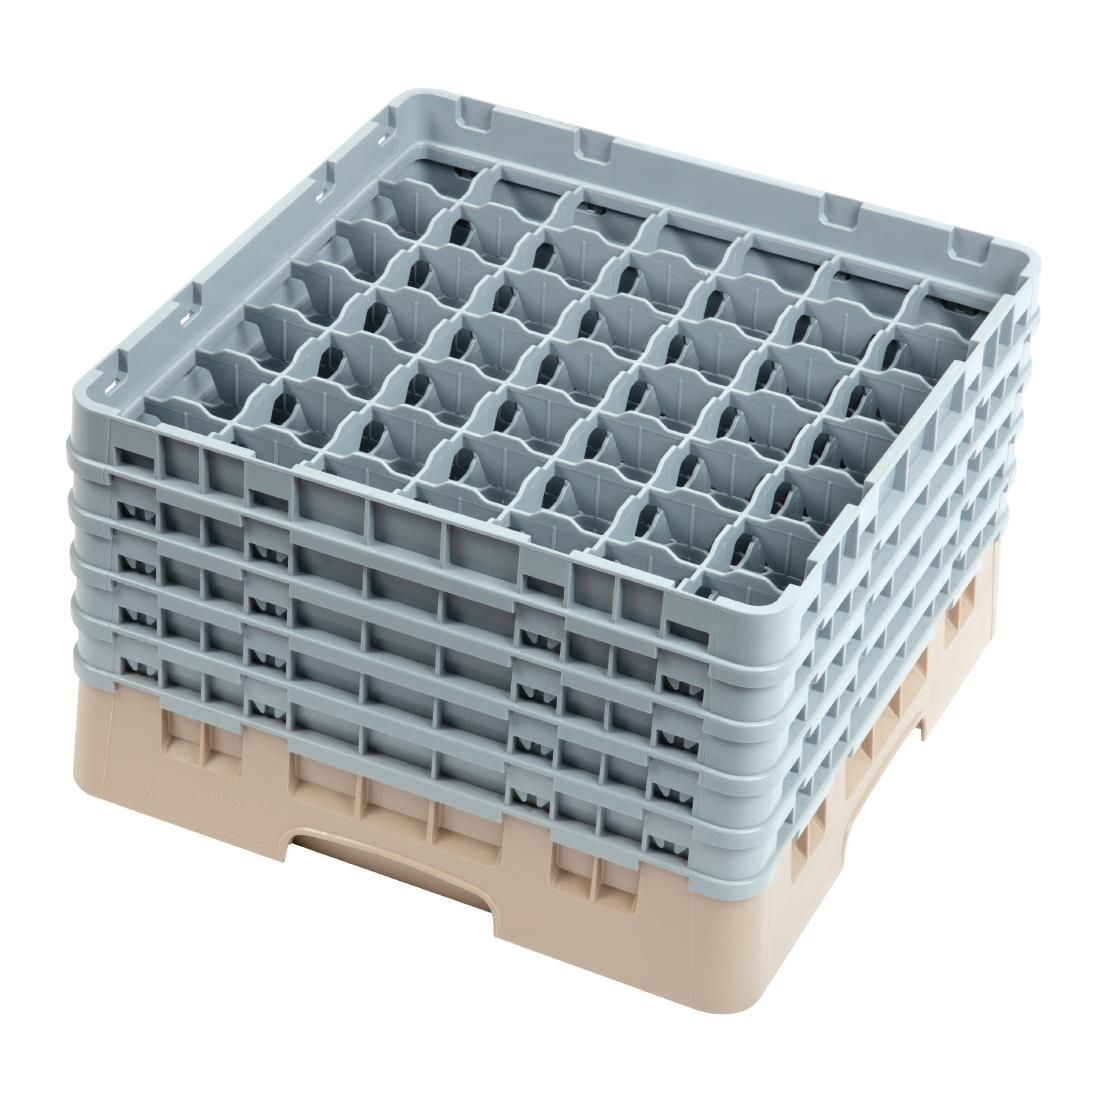 Cambro Camrack Beige 49 Compartments Max Glass Height 257mm JD Catering Equipment Solutions Ltd